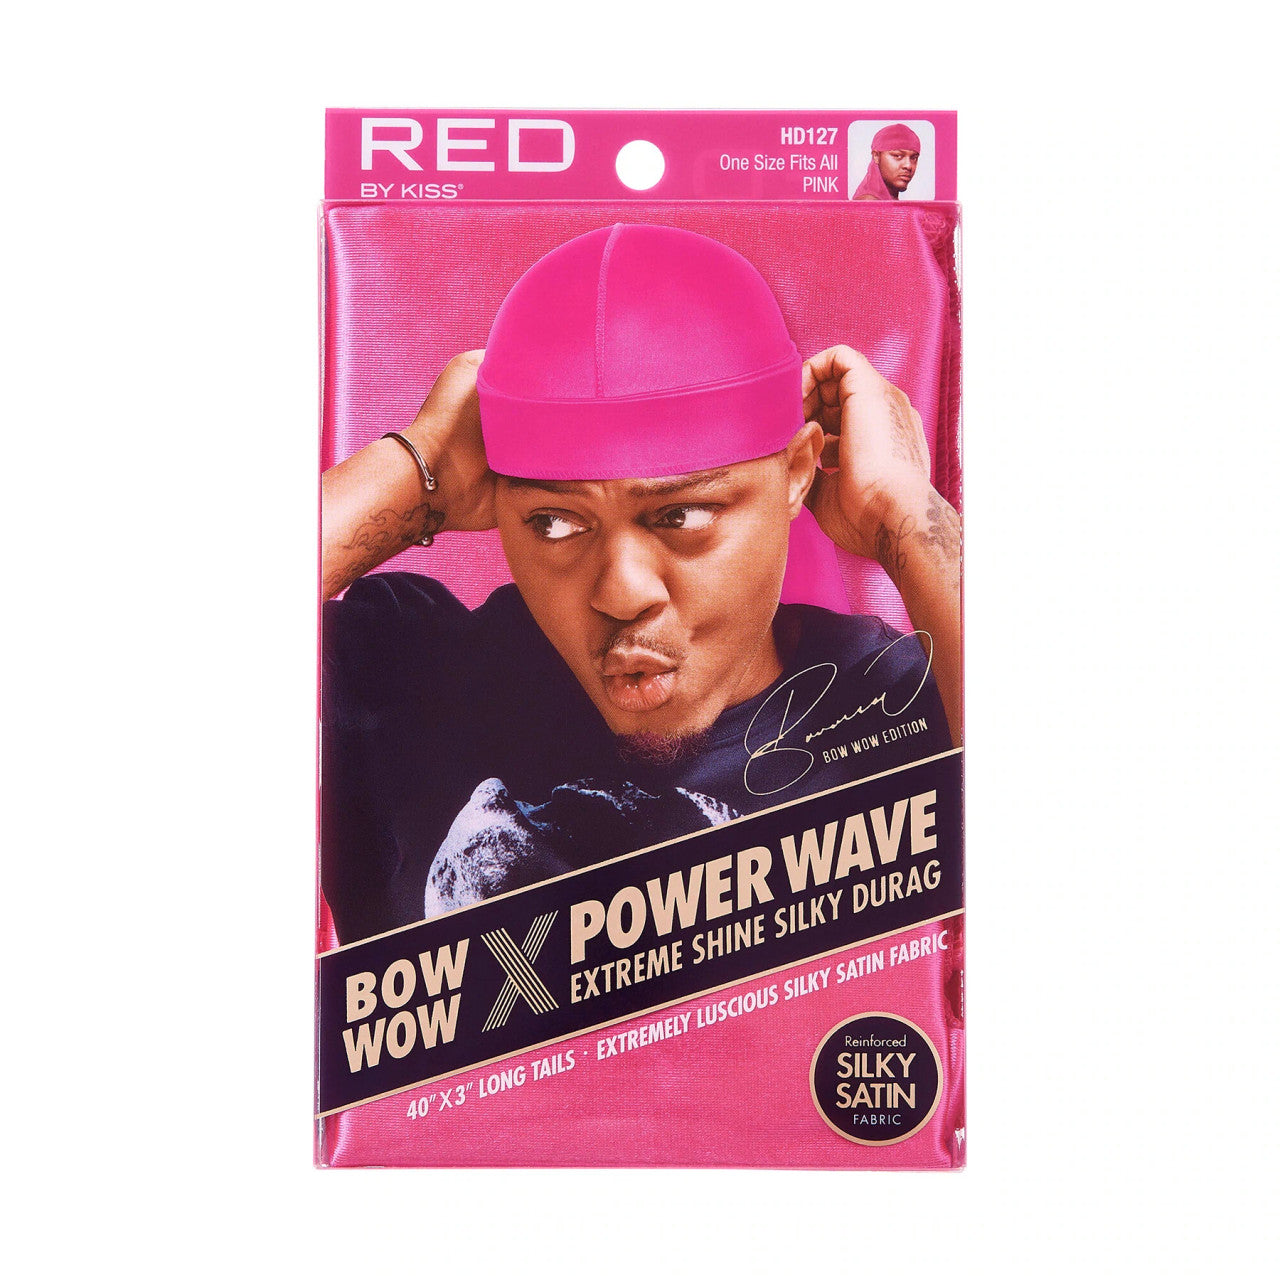 Red by Kiss Bow Wow X Power Wave Extreme Shine Silky Durag - Pink - #HD127